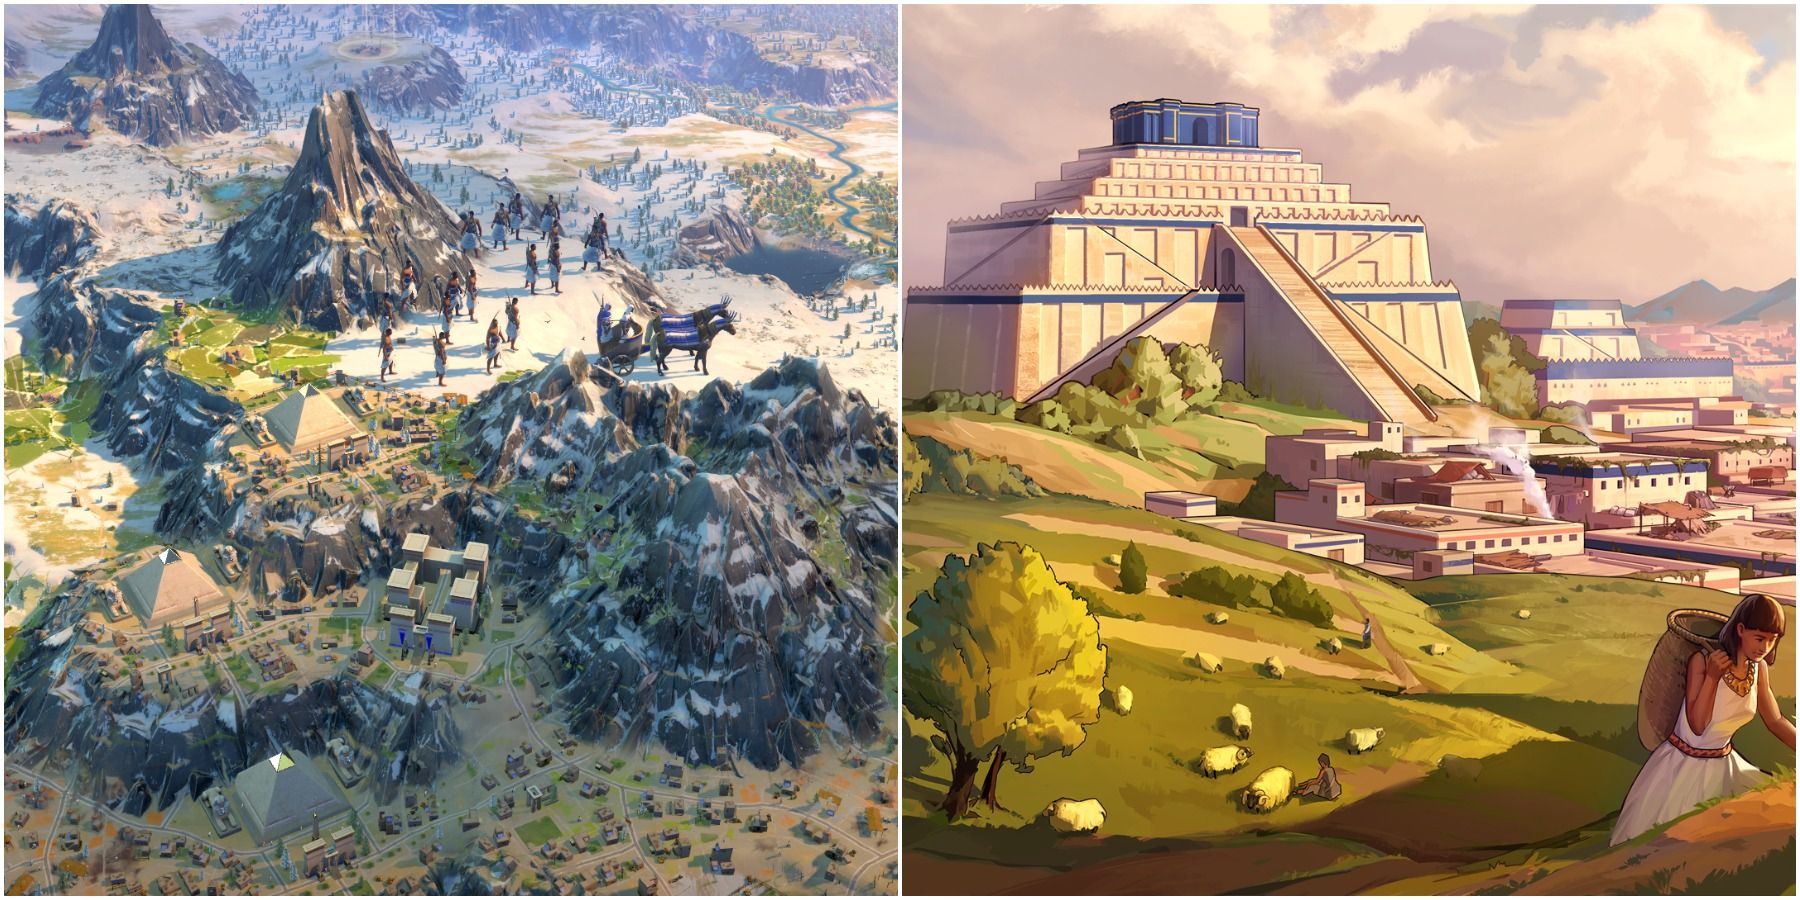 (Left) Units on a mountain (Right) Promotional image of a city and a women working